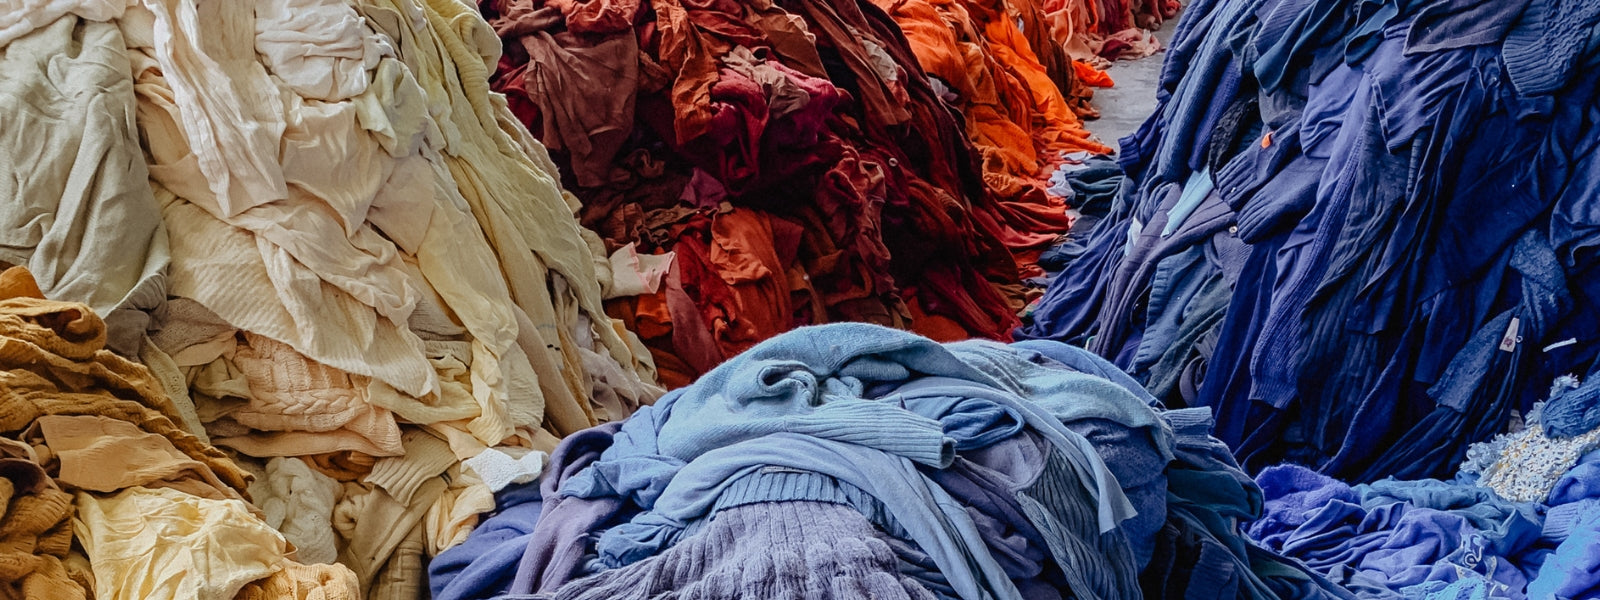 Piles of recycled dyed garments organised by colour